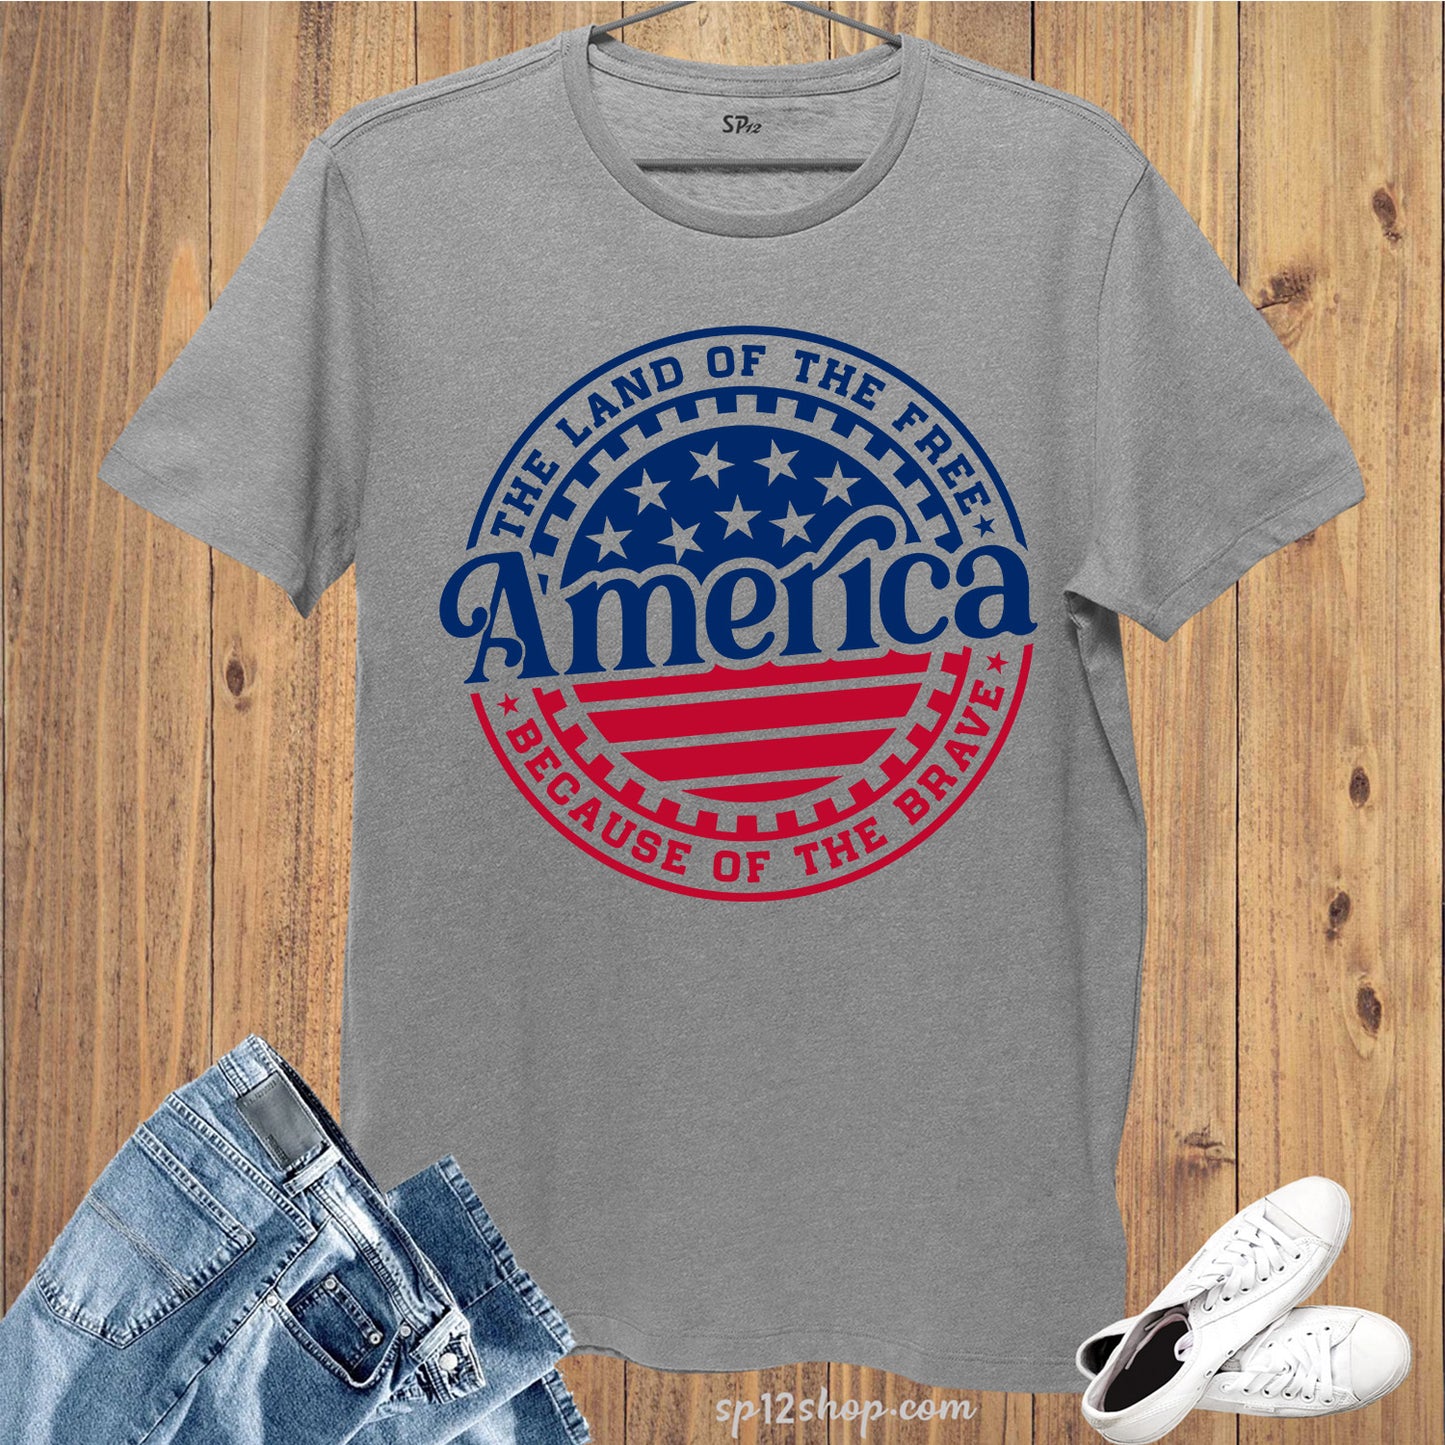 Home Of the Free Shirt, Because Of The Brave 4th Of July Independence Day T Shirt